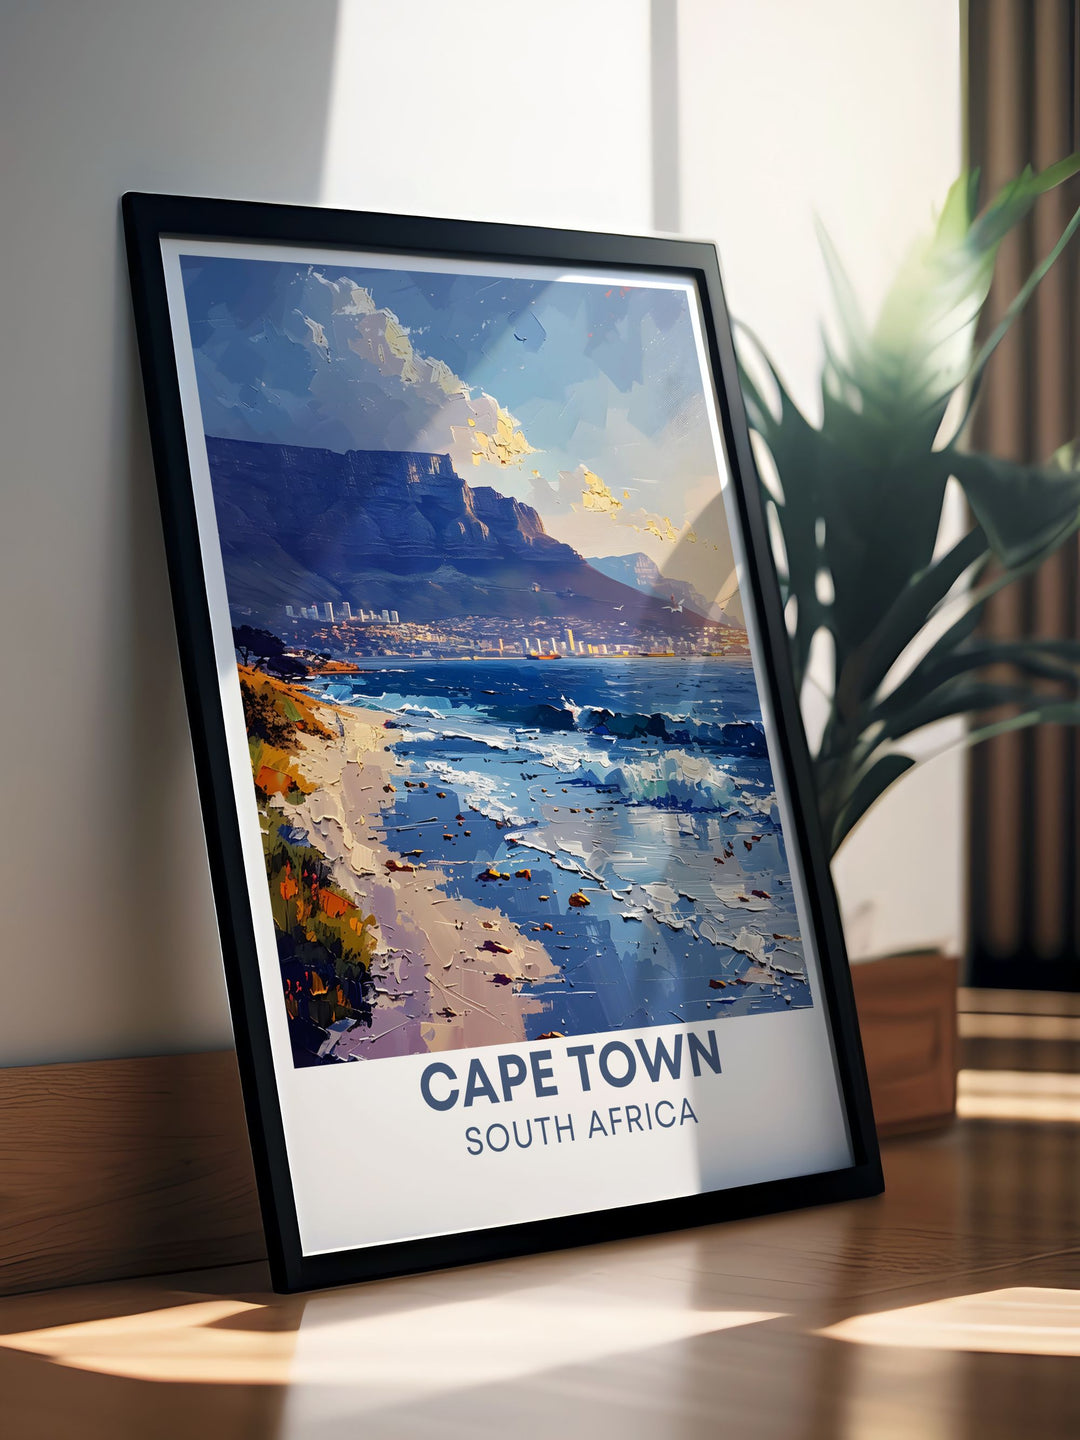 The picturesque scenery of Cape Town with Table Mountain as a backdrop is featured in this vibrant travel poster, perfect for adding South Africas unique charm to your home.